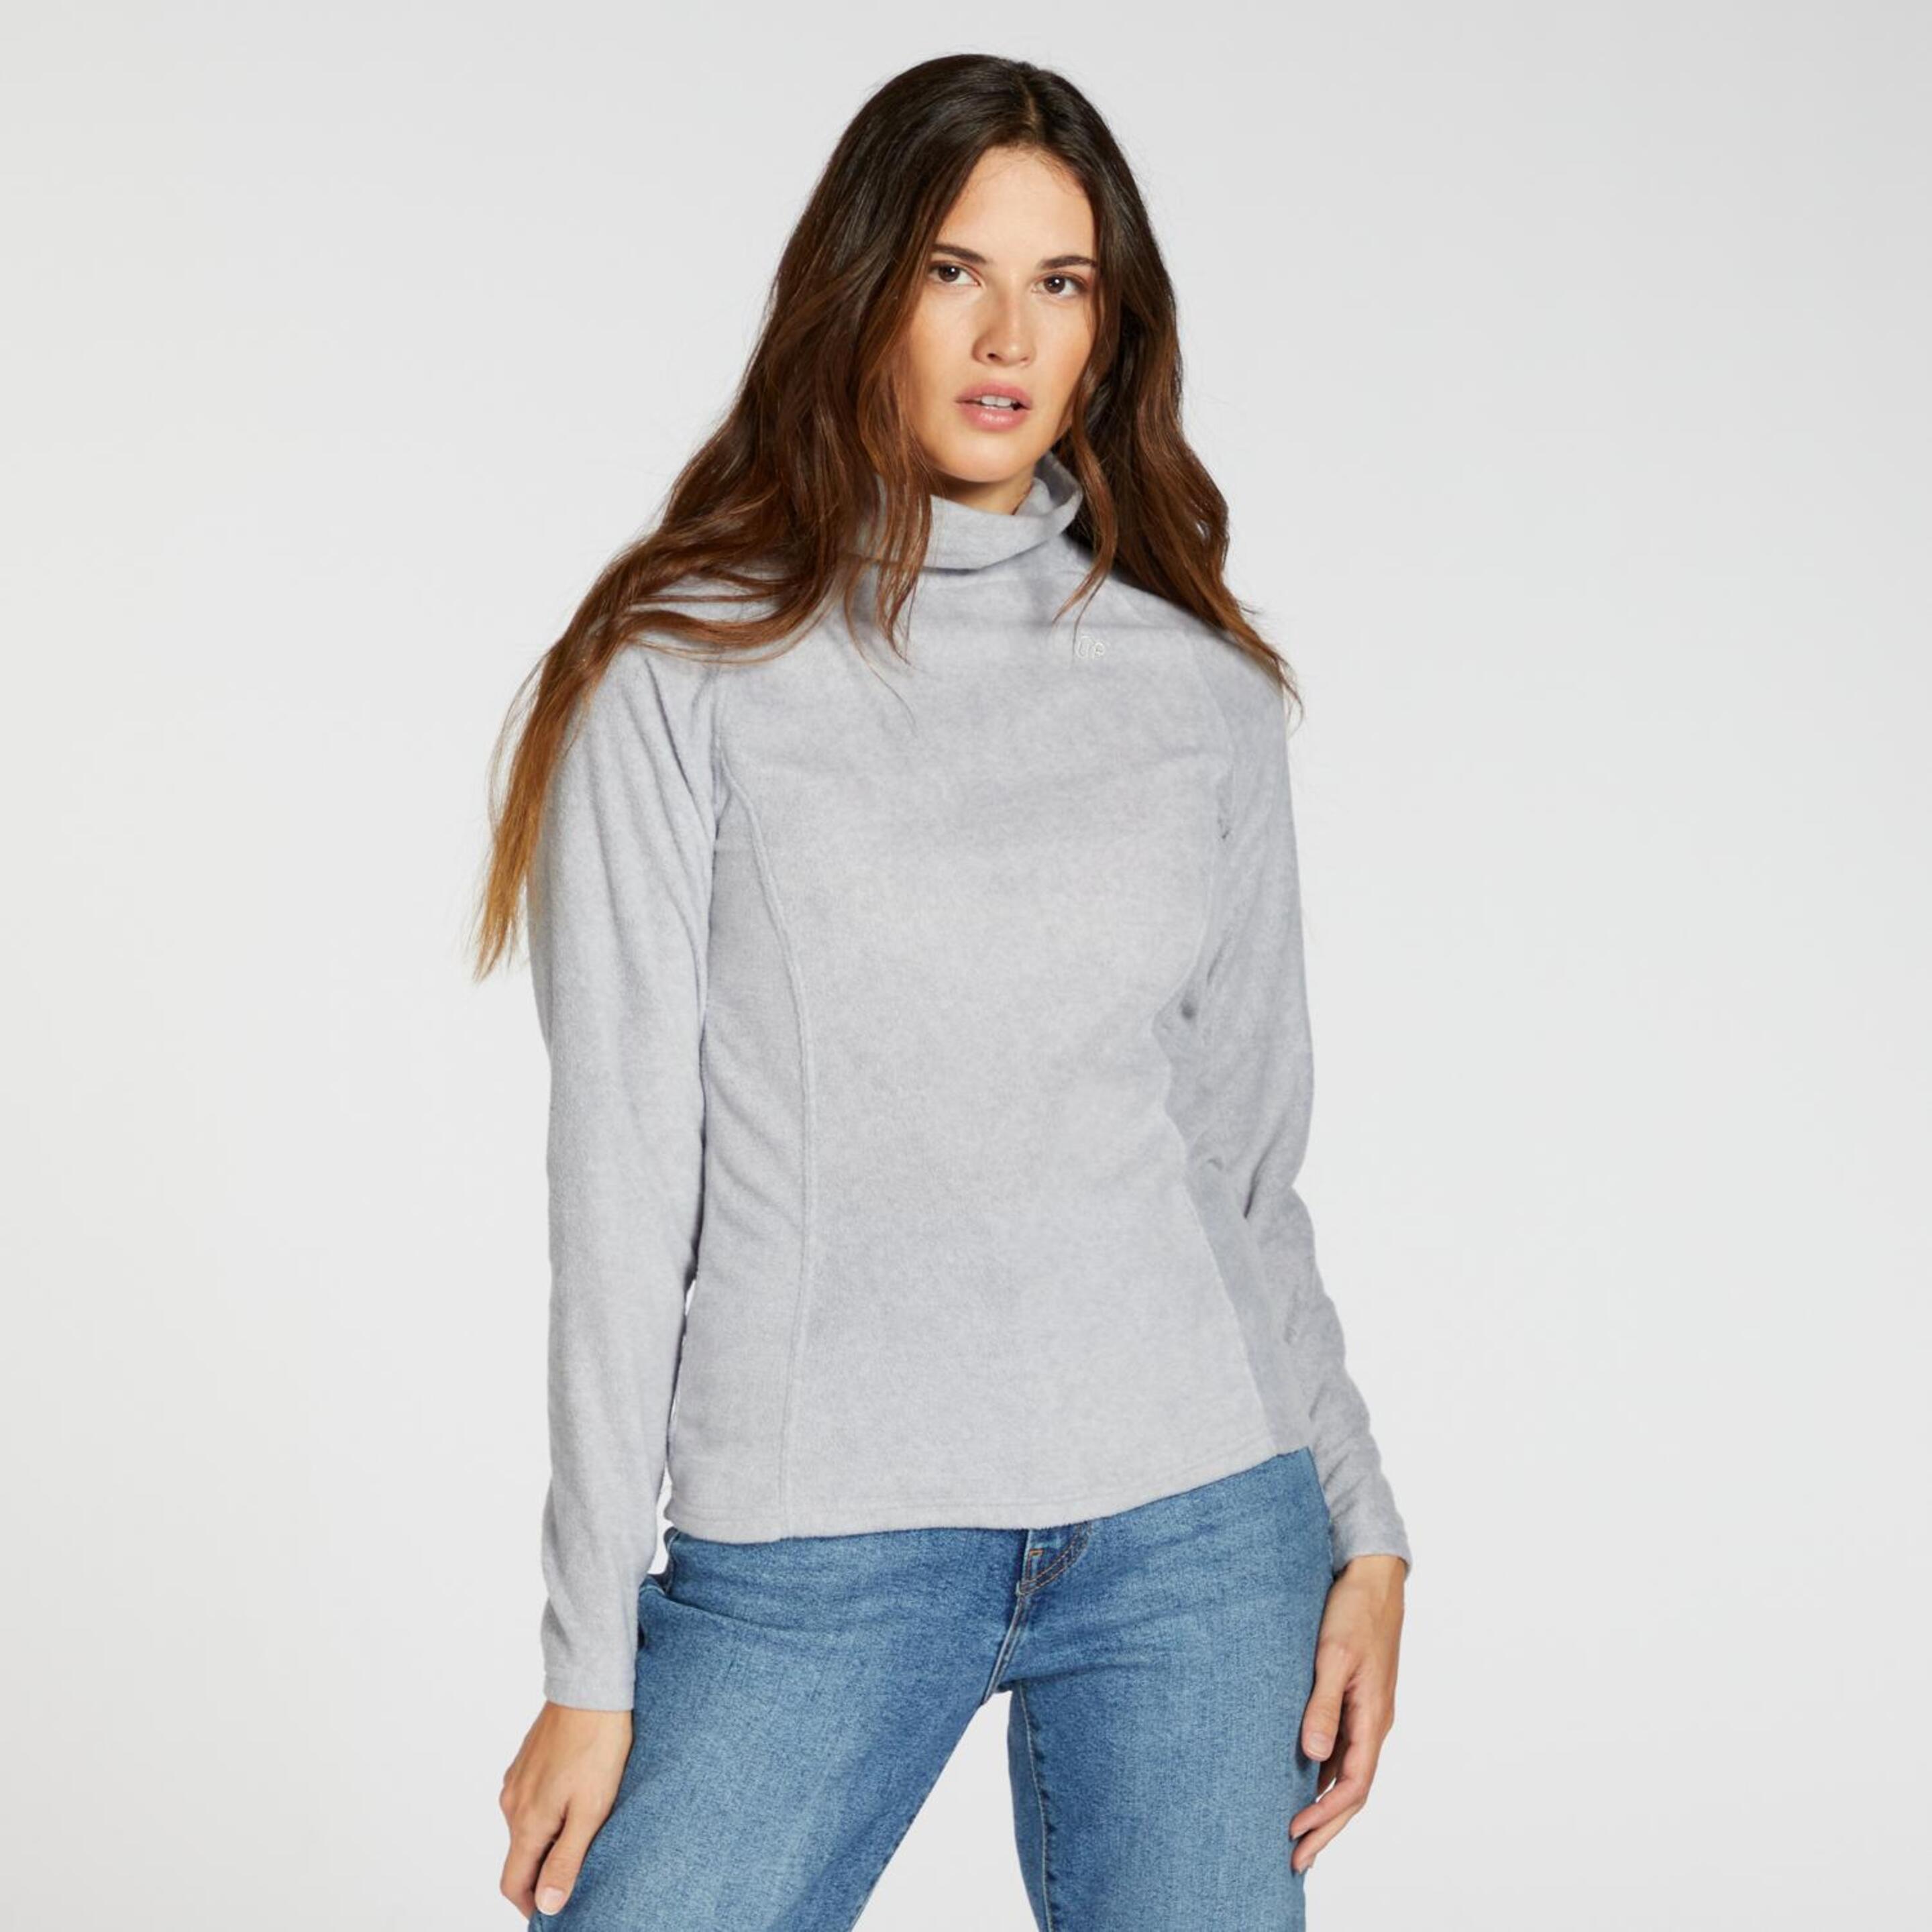 Up Basic - gris - Forro Polar Mujer